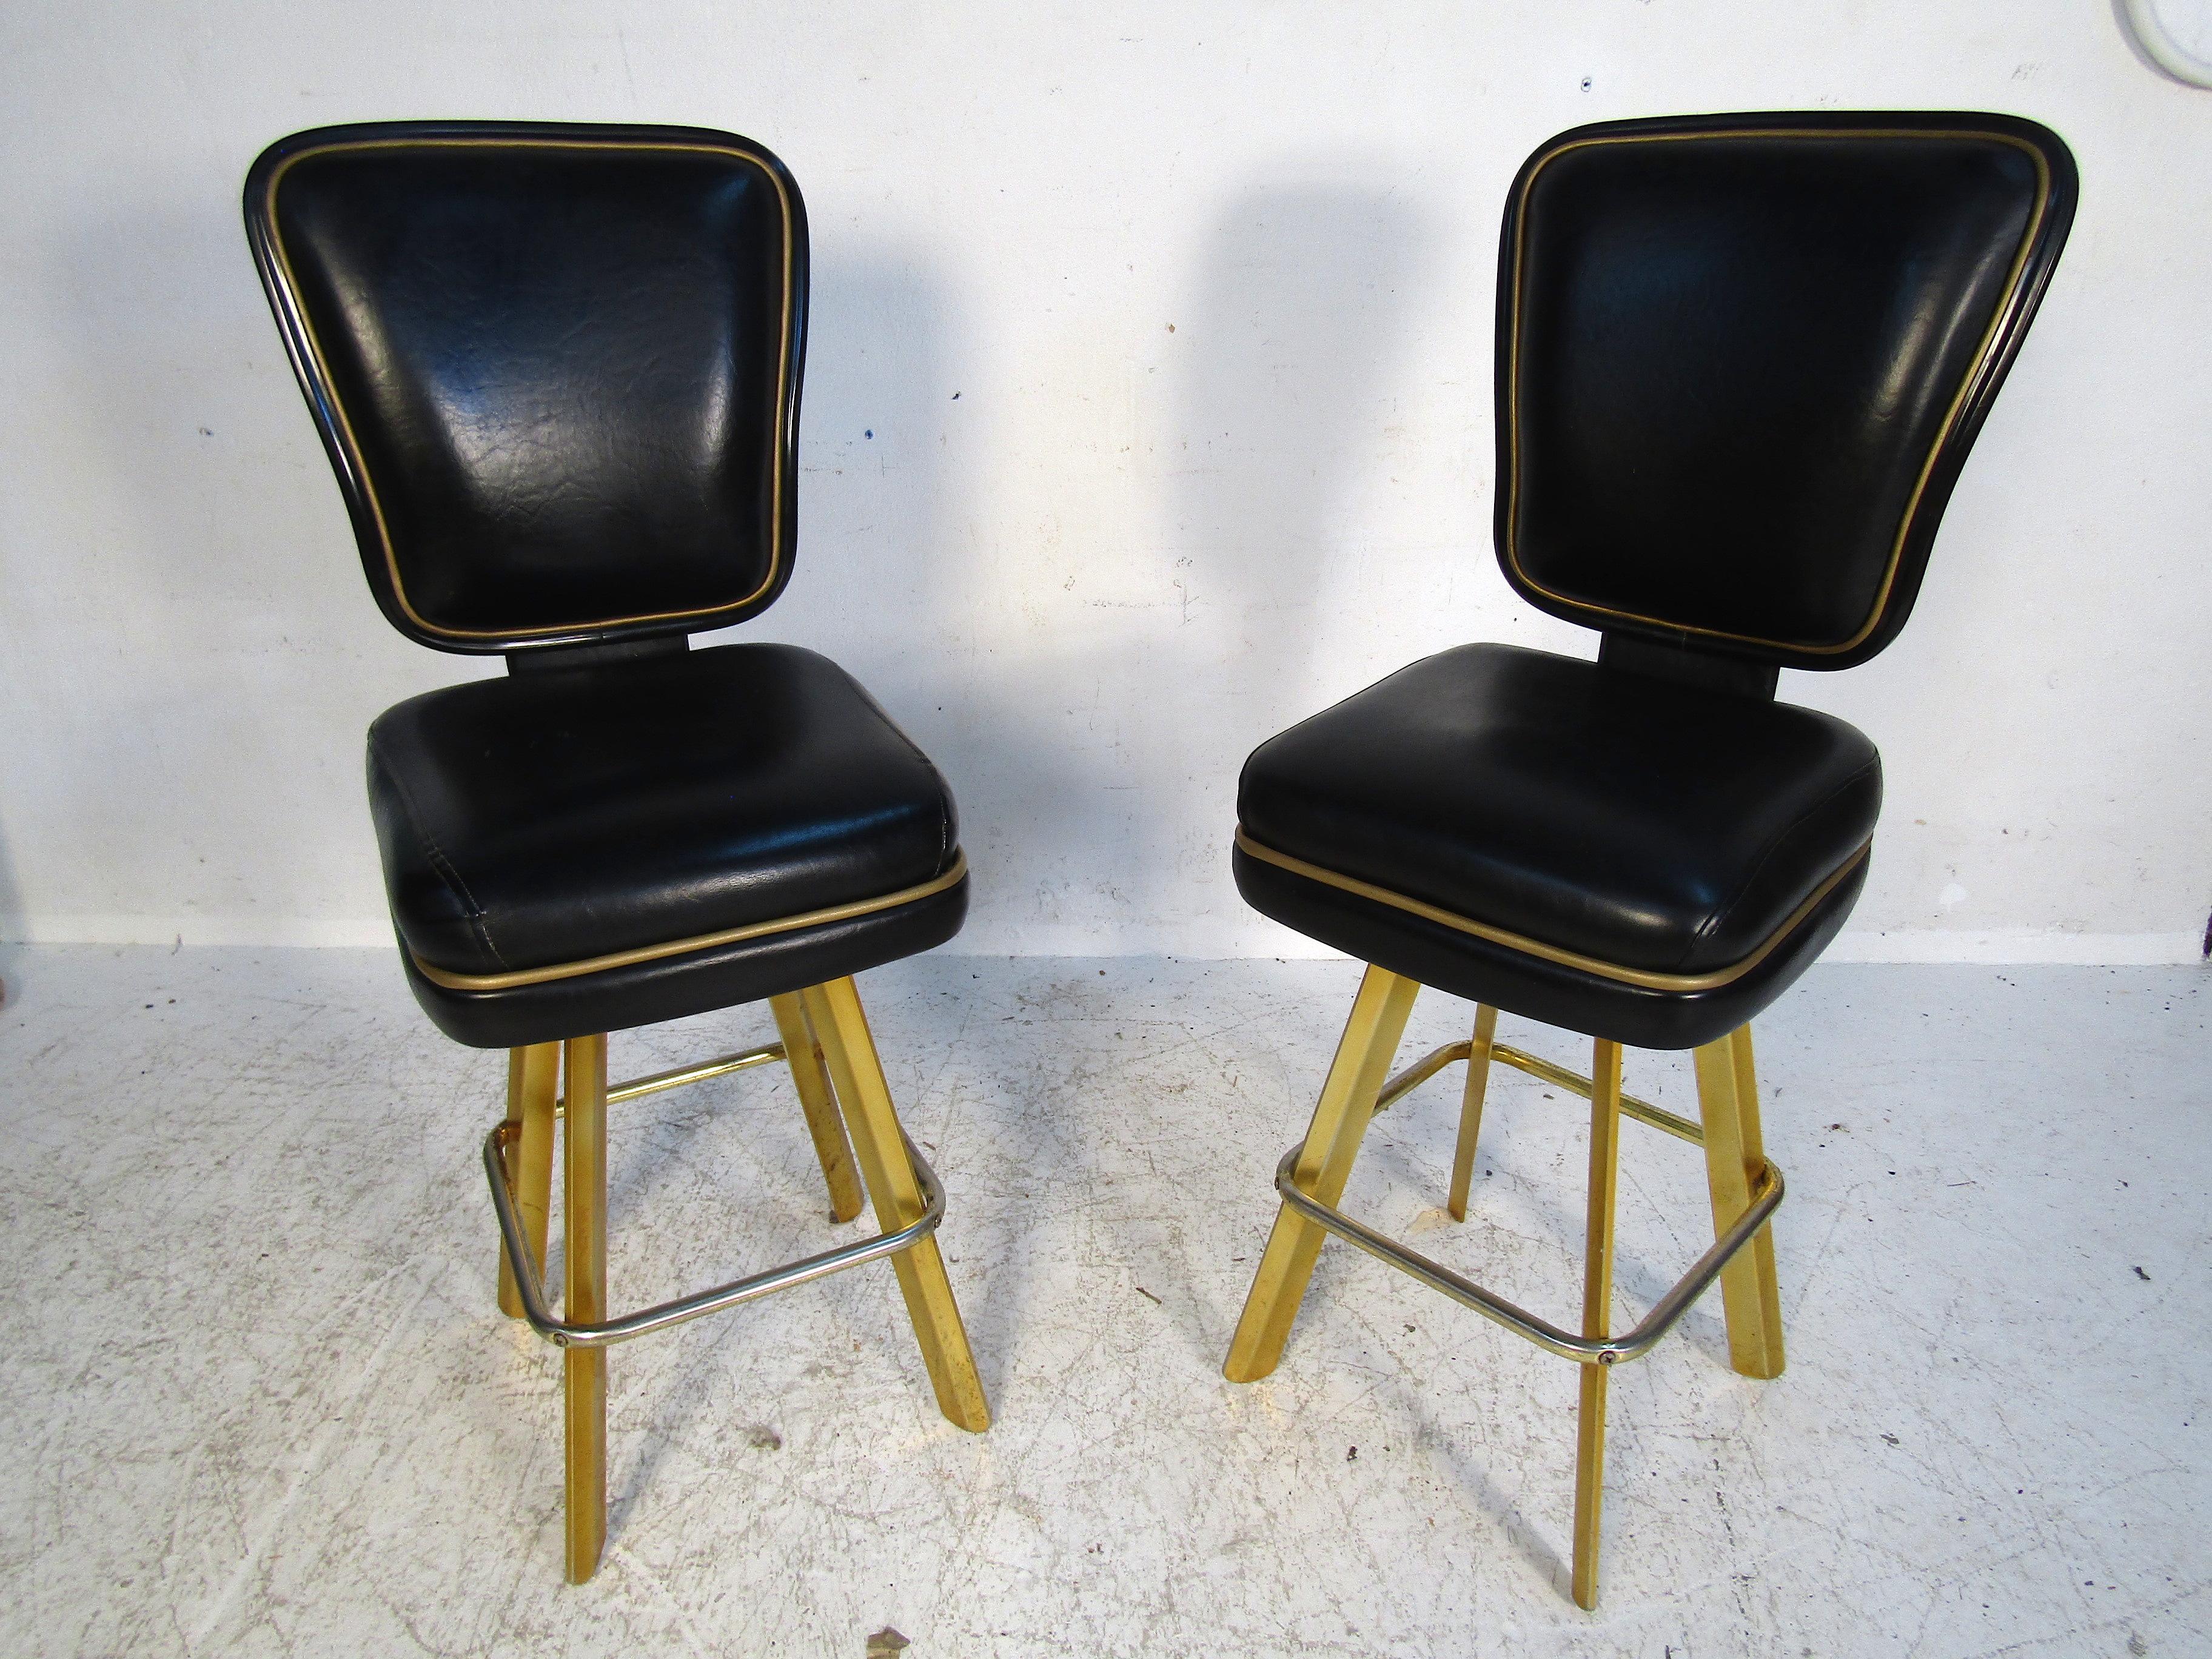 This pair of stools are from the famous Trump Plaza in NYC. Featuring high backs and thick seat cushions these stools are perfect for any home bar or game room. Sturdy brass legs and well-constructed seats will ensure this set will be around for